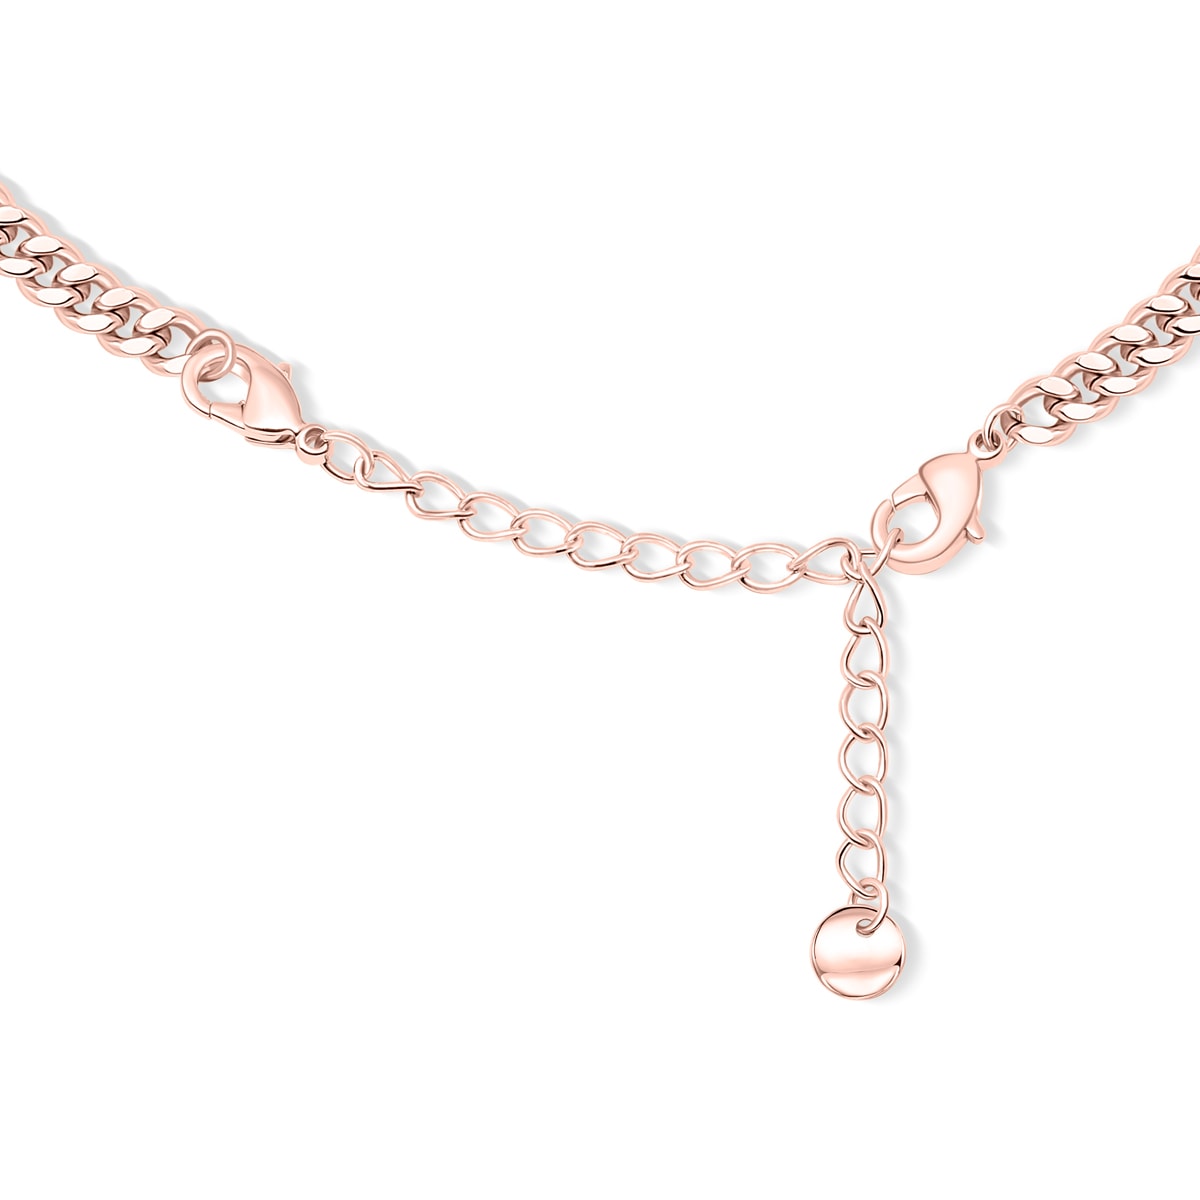 Affordable thick rose gold necklace